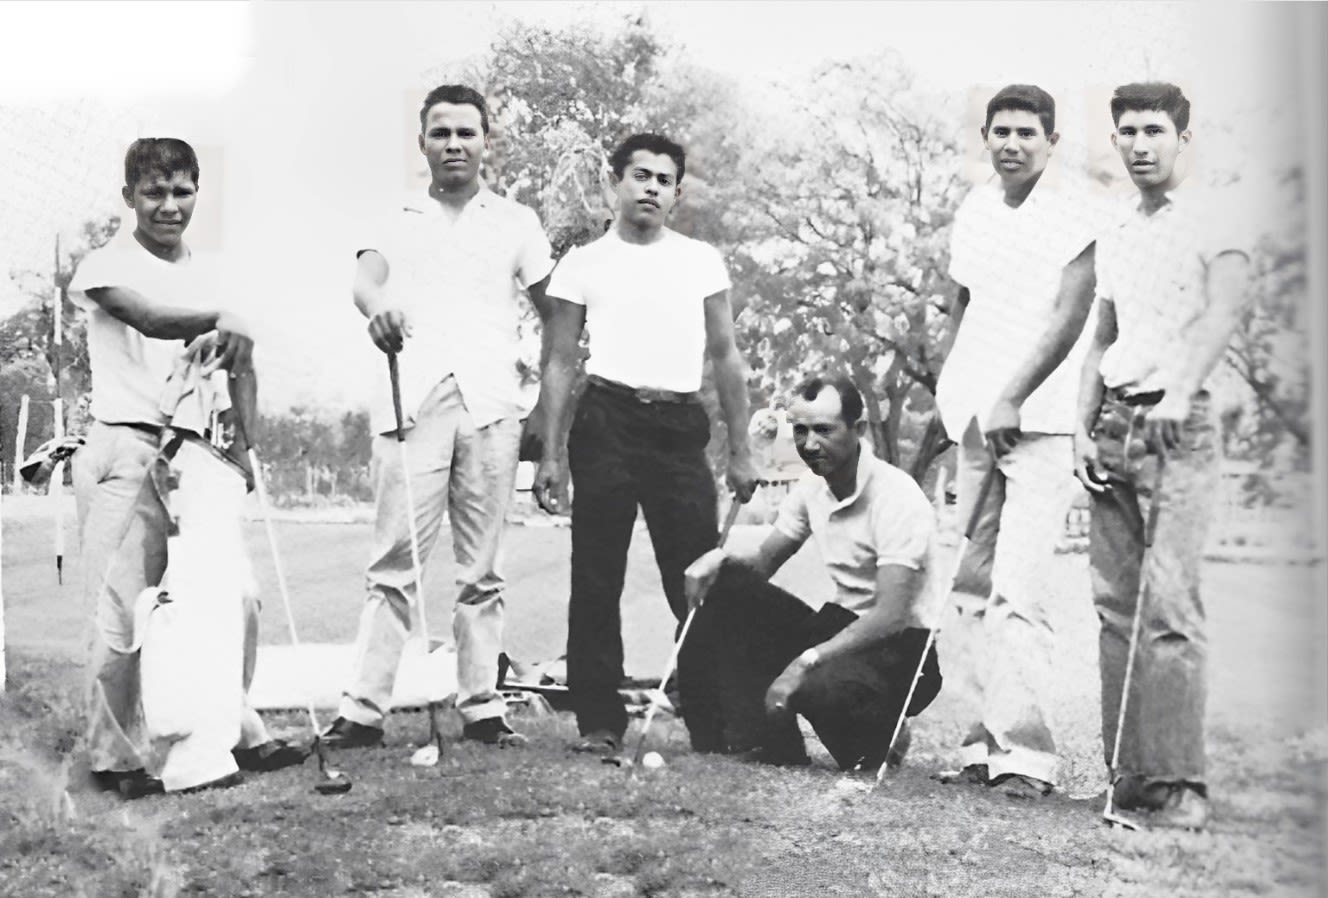 The original members of the San Felipe High School Mustangs' golf team, an inspiring group who changed the game for so many.